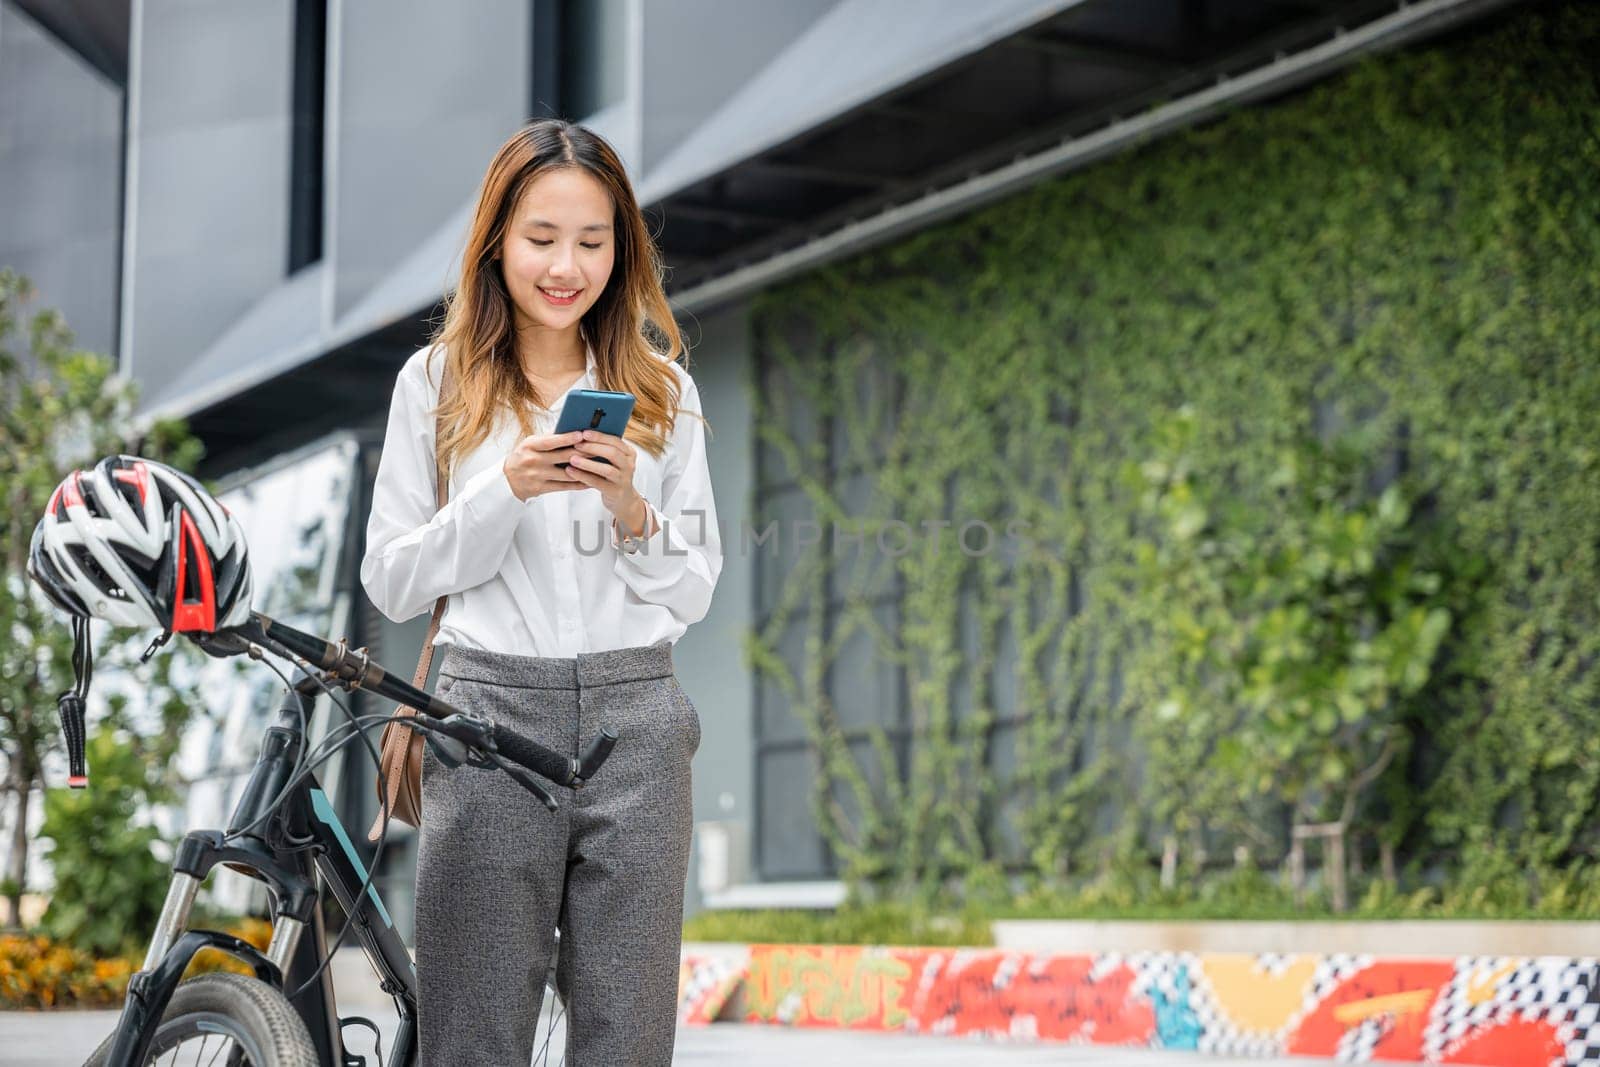 A young businesswoman smiling and holding her smartphone enjoys a bike ride through the city. Her ability to blend work and fun is a testament to the modern concept of work-life balance.